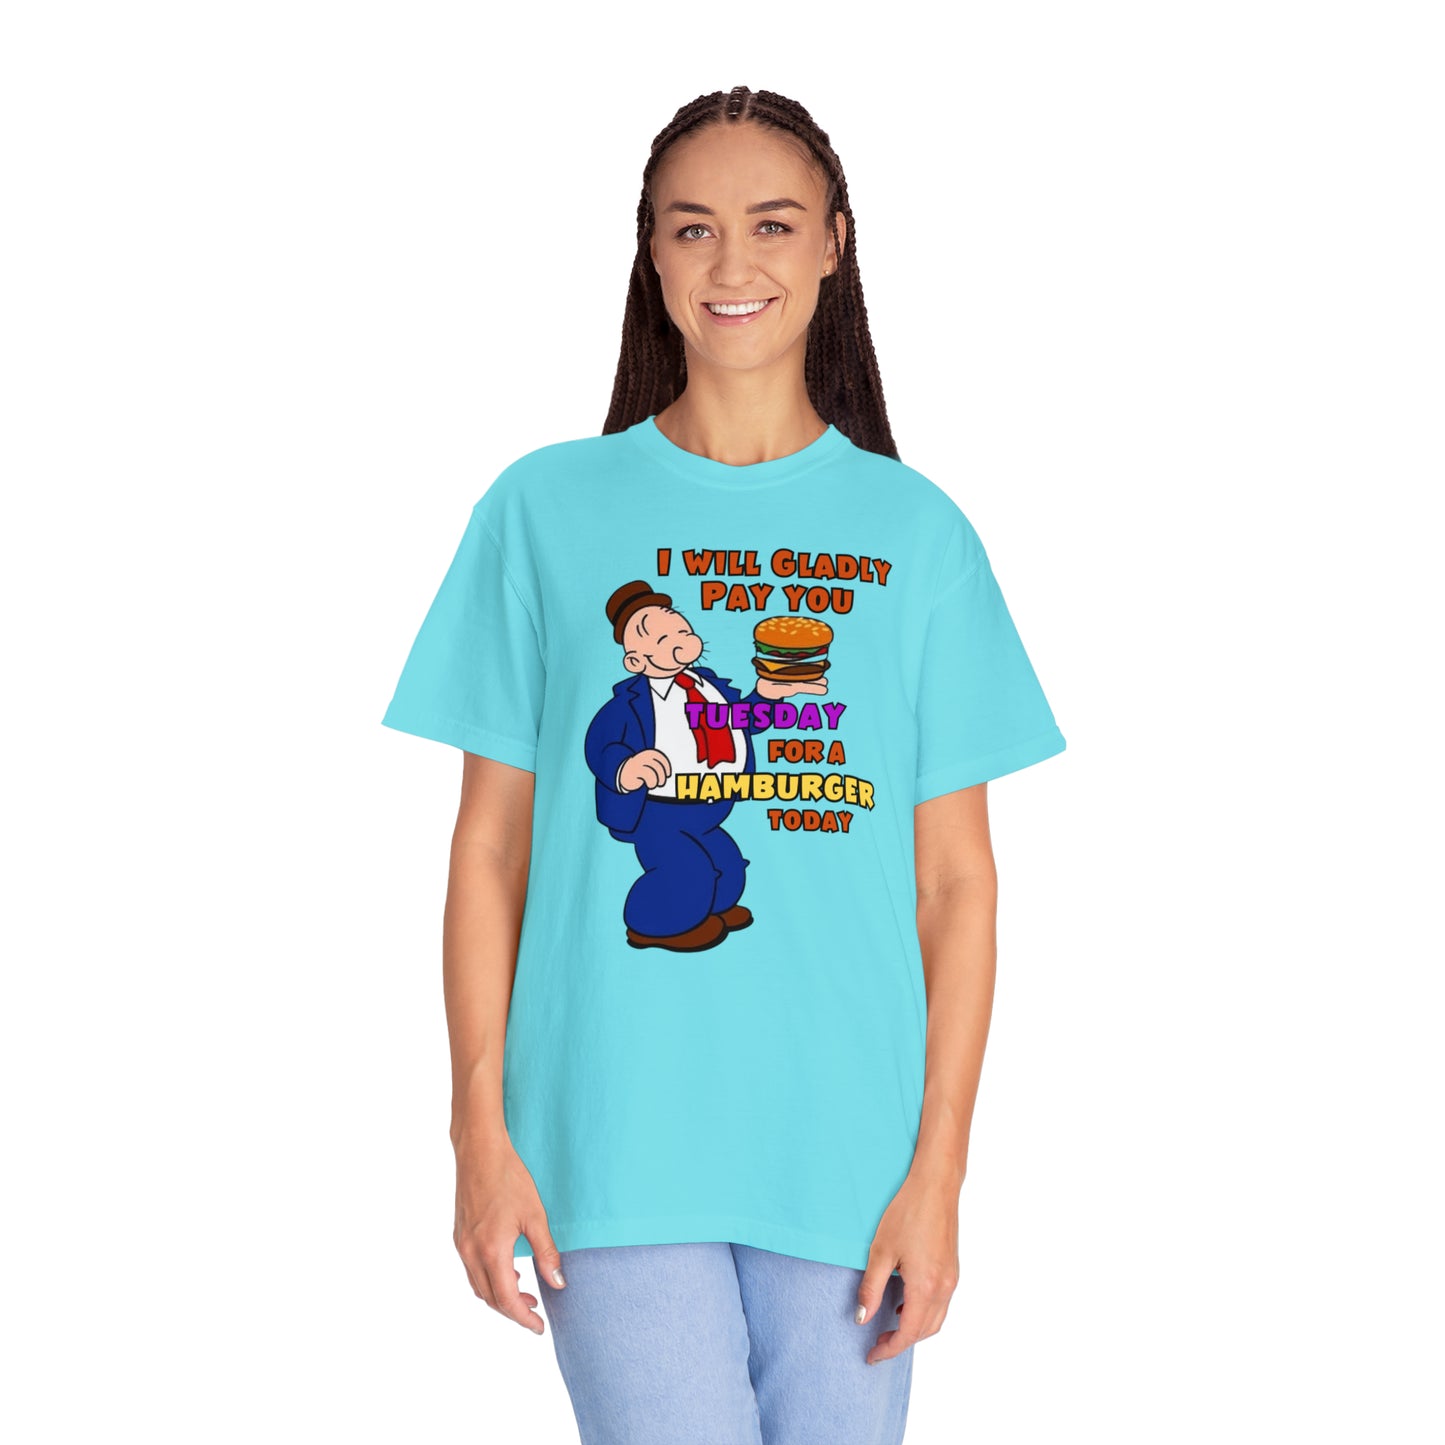 Popeye's Friend Wimpy "Gladly Pay You Tuesday" Unisex Garment-Dyed T-shirt